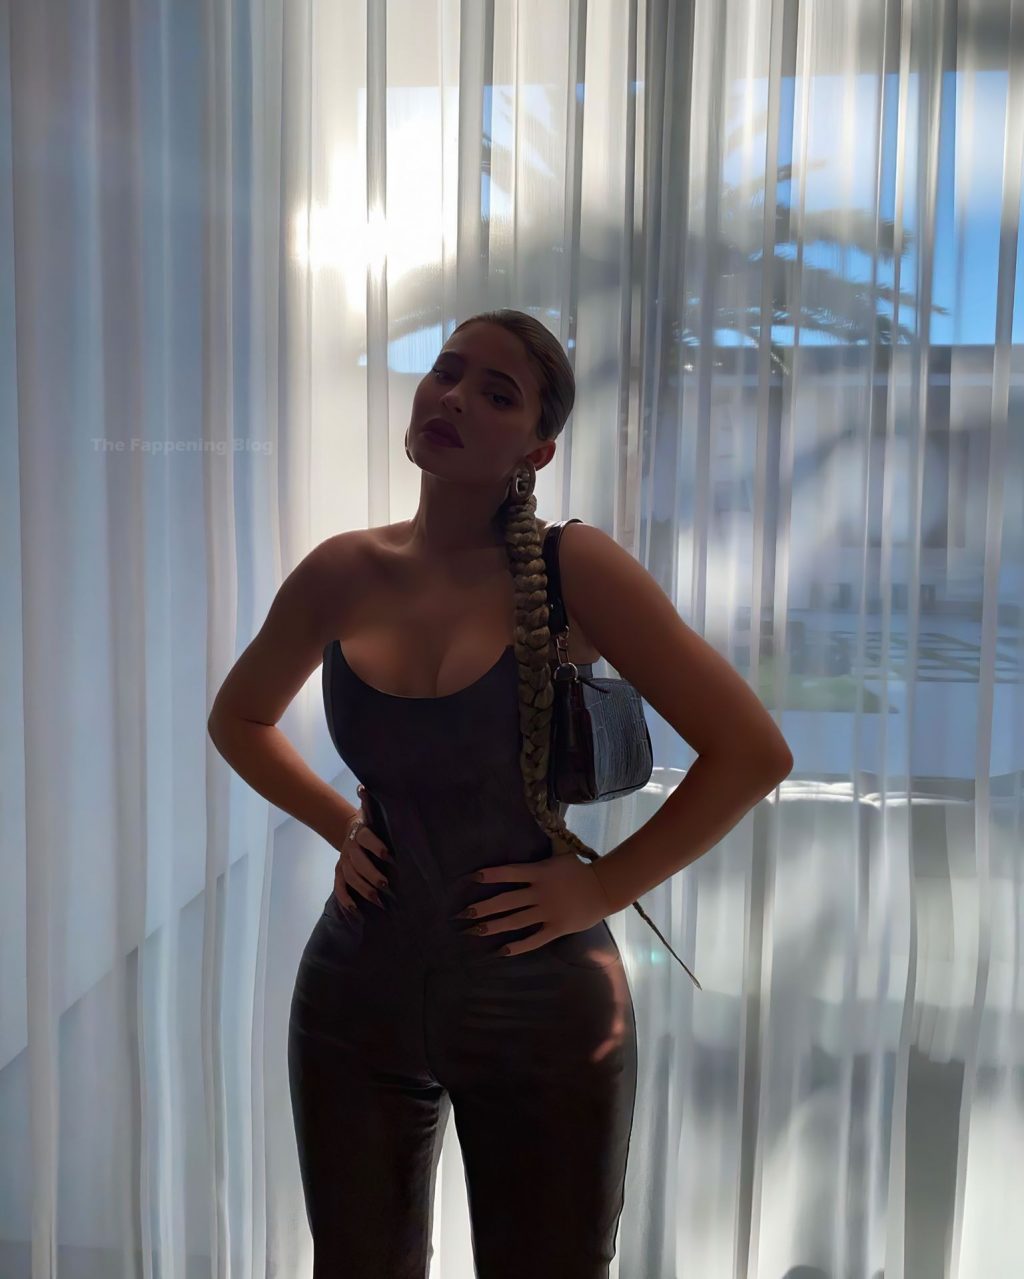 Kylie Jenner Shows Her Rich Curves (17 Photos)